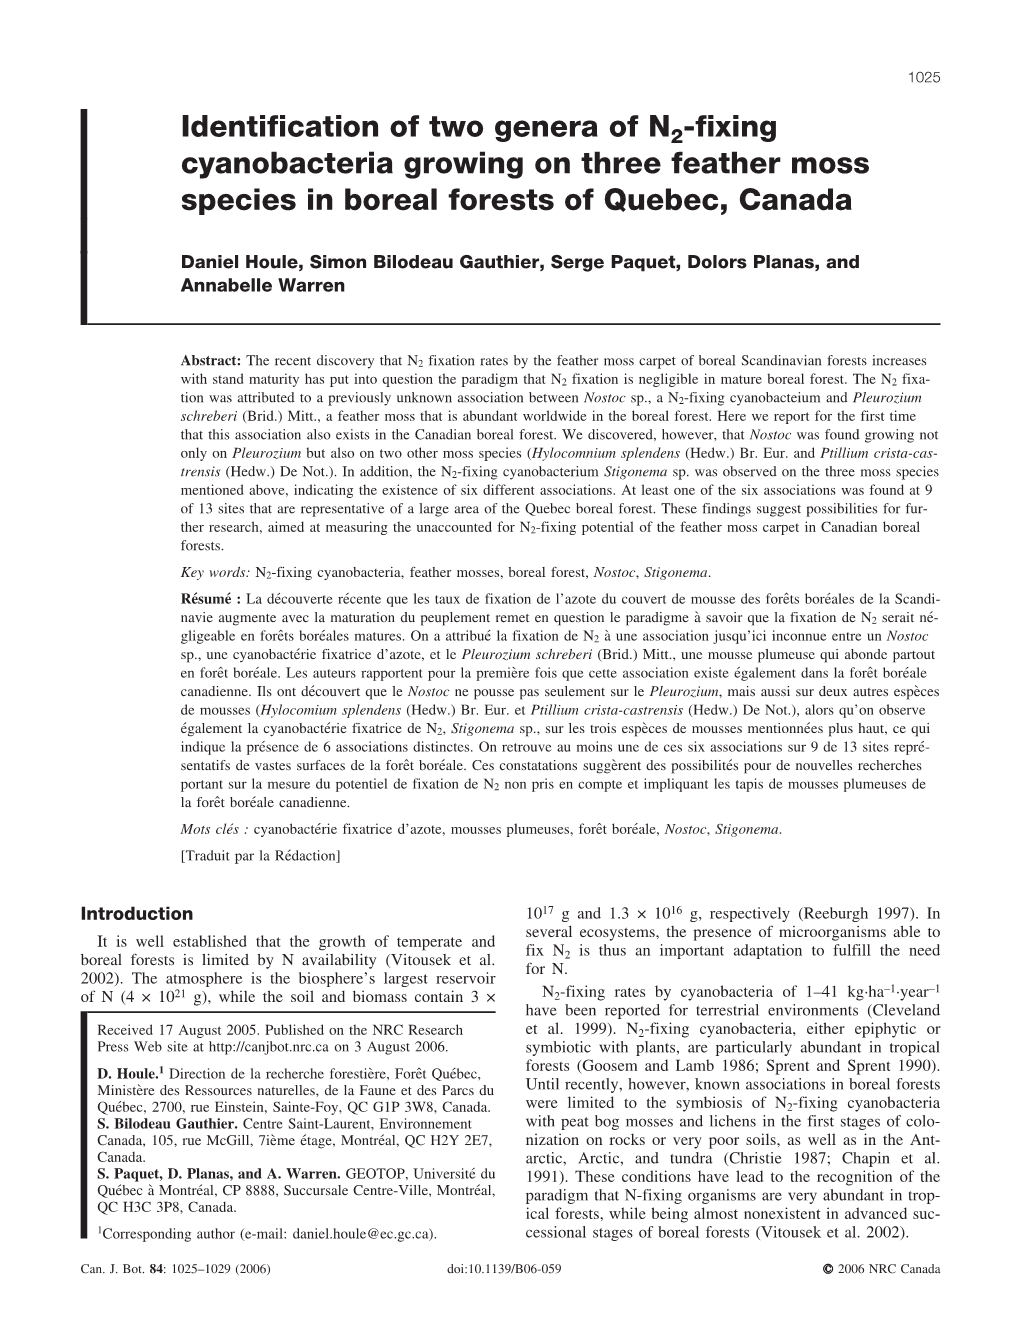 Fixing Cyanobacteria Growing on Three Feather Moss Species in Boreal Forests of Quebec, Canada